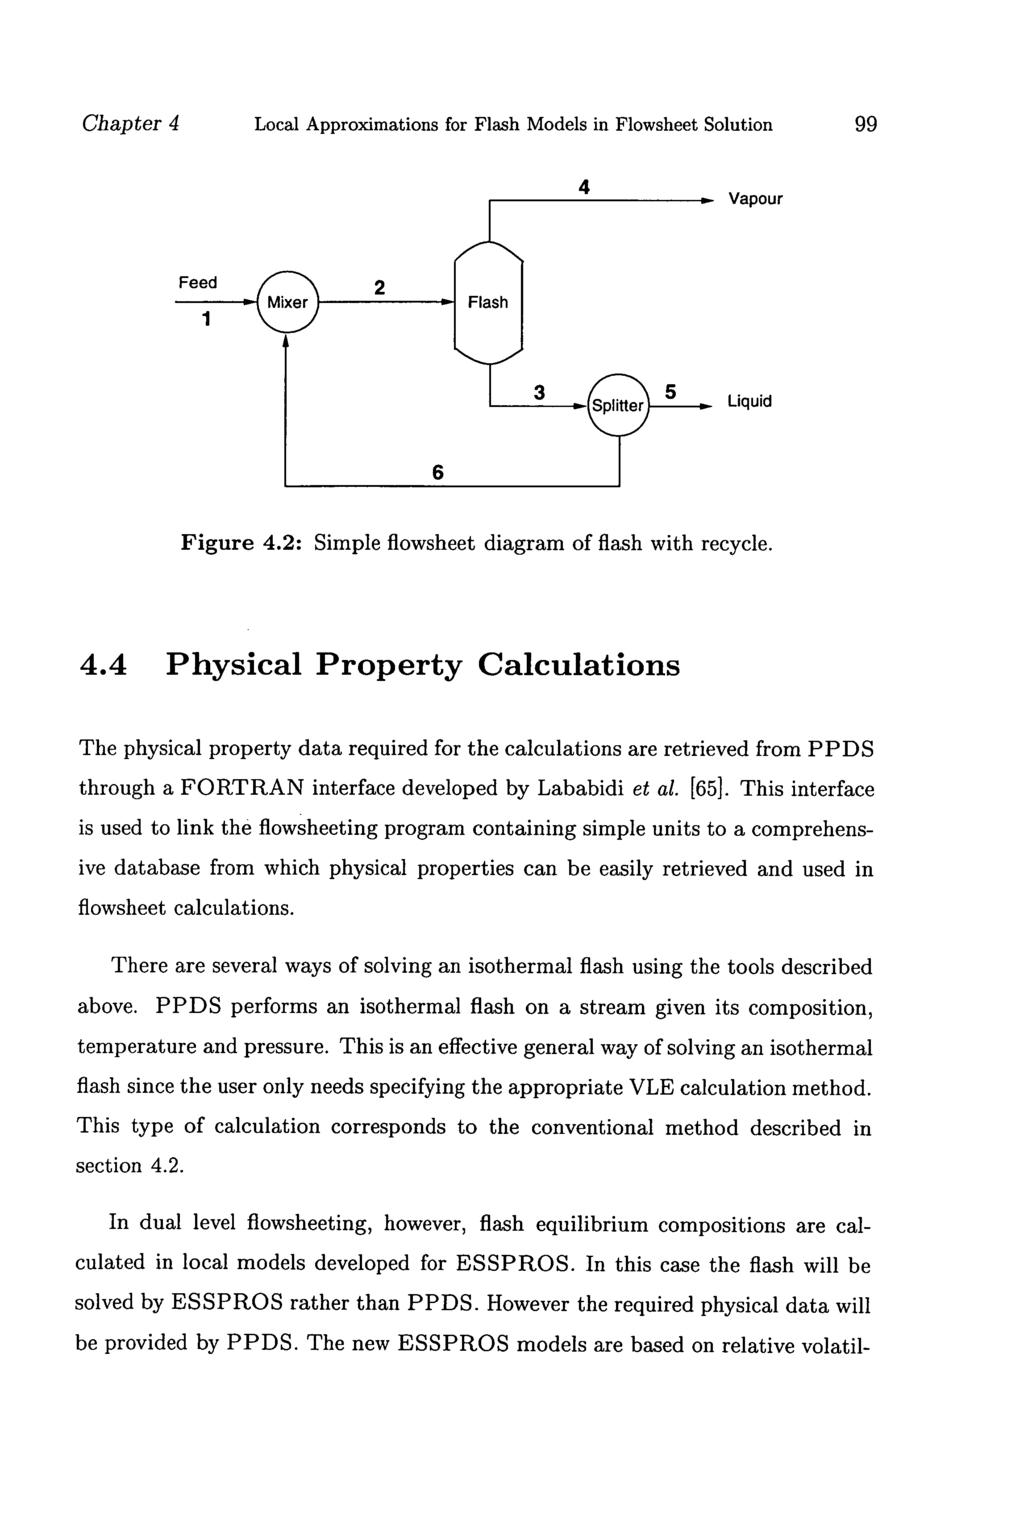 Chapter 4 Local Approximations for Flash Models in Flowsheet Solution 99 4 Vapour Liquid Figure 4.2: Simple flowsheet diagram of flash with recycle. 4.4 Physical Property Calculations The physical property data required for the calculations are retrieved from PPDS through a FORTRAN interface developed by Lababidi et al.